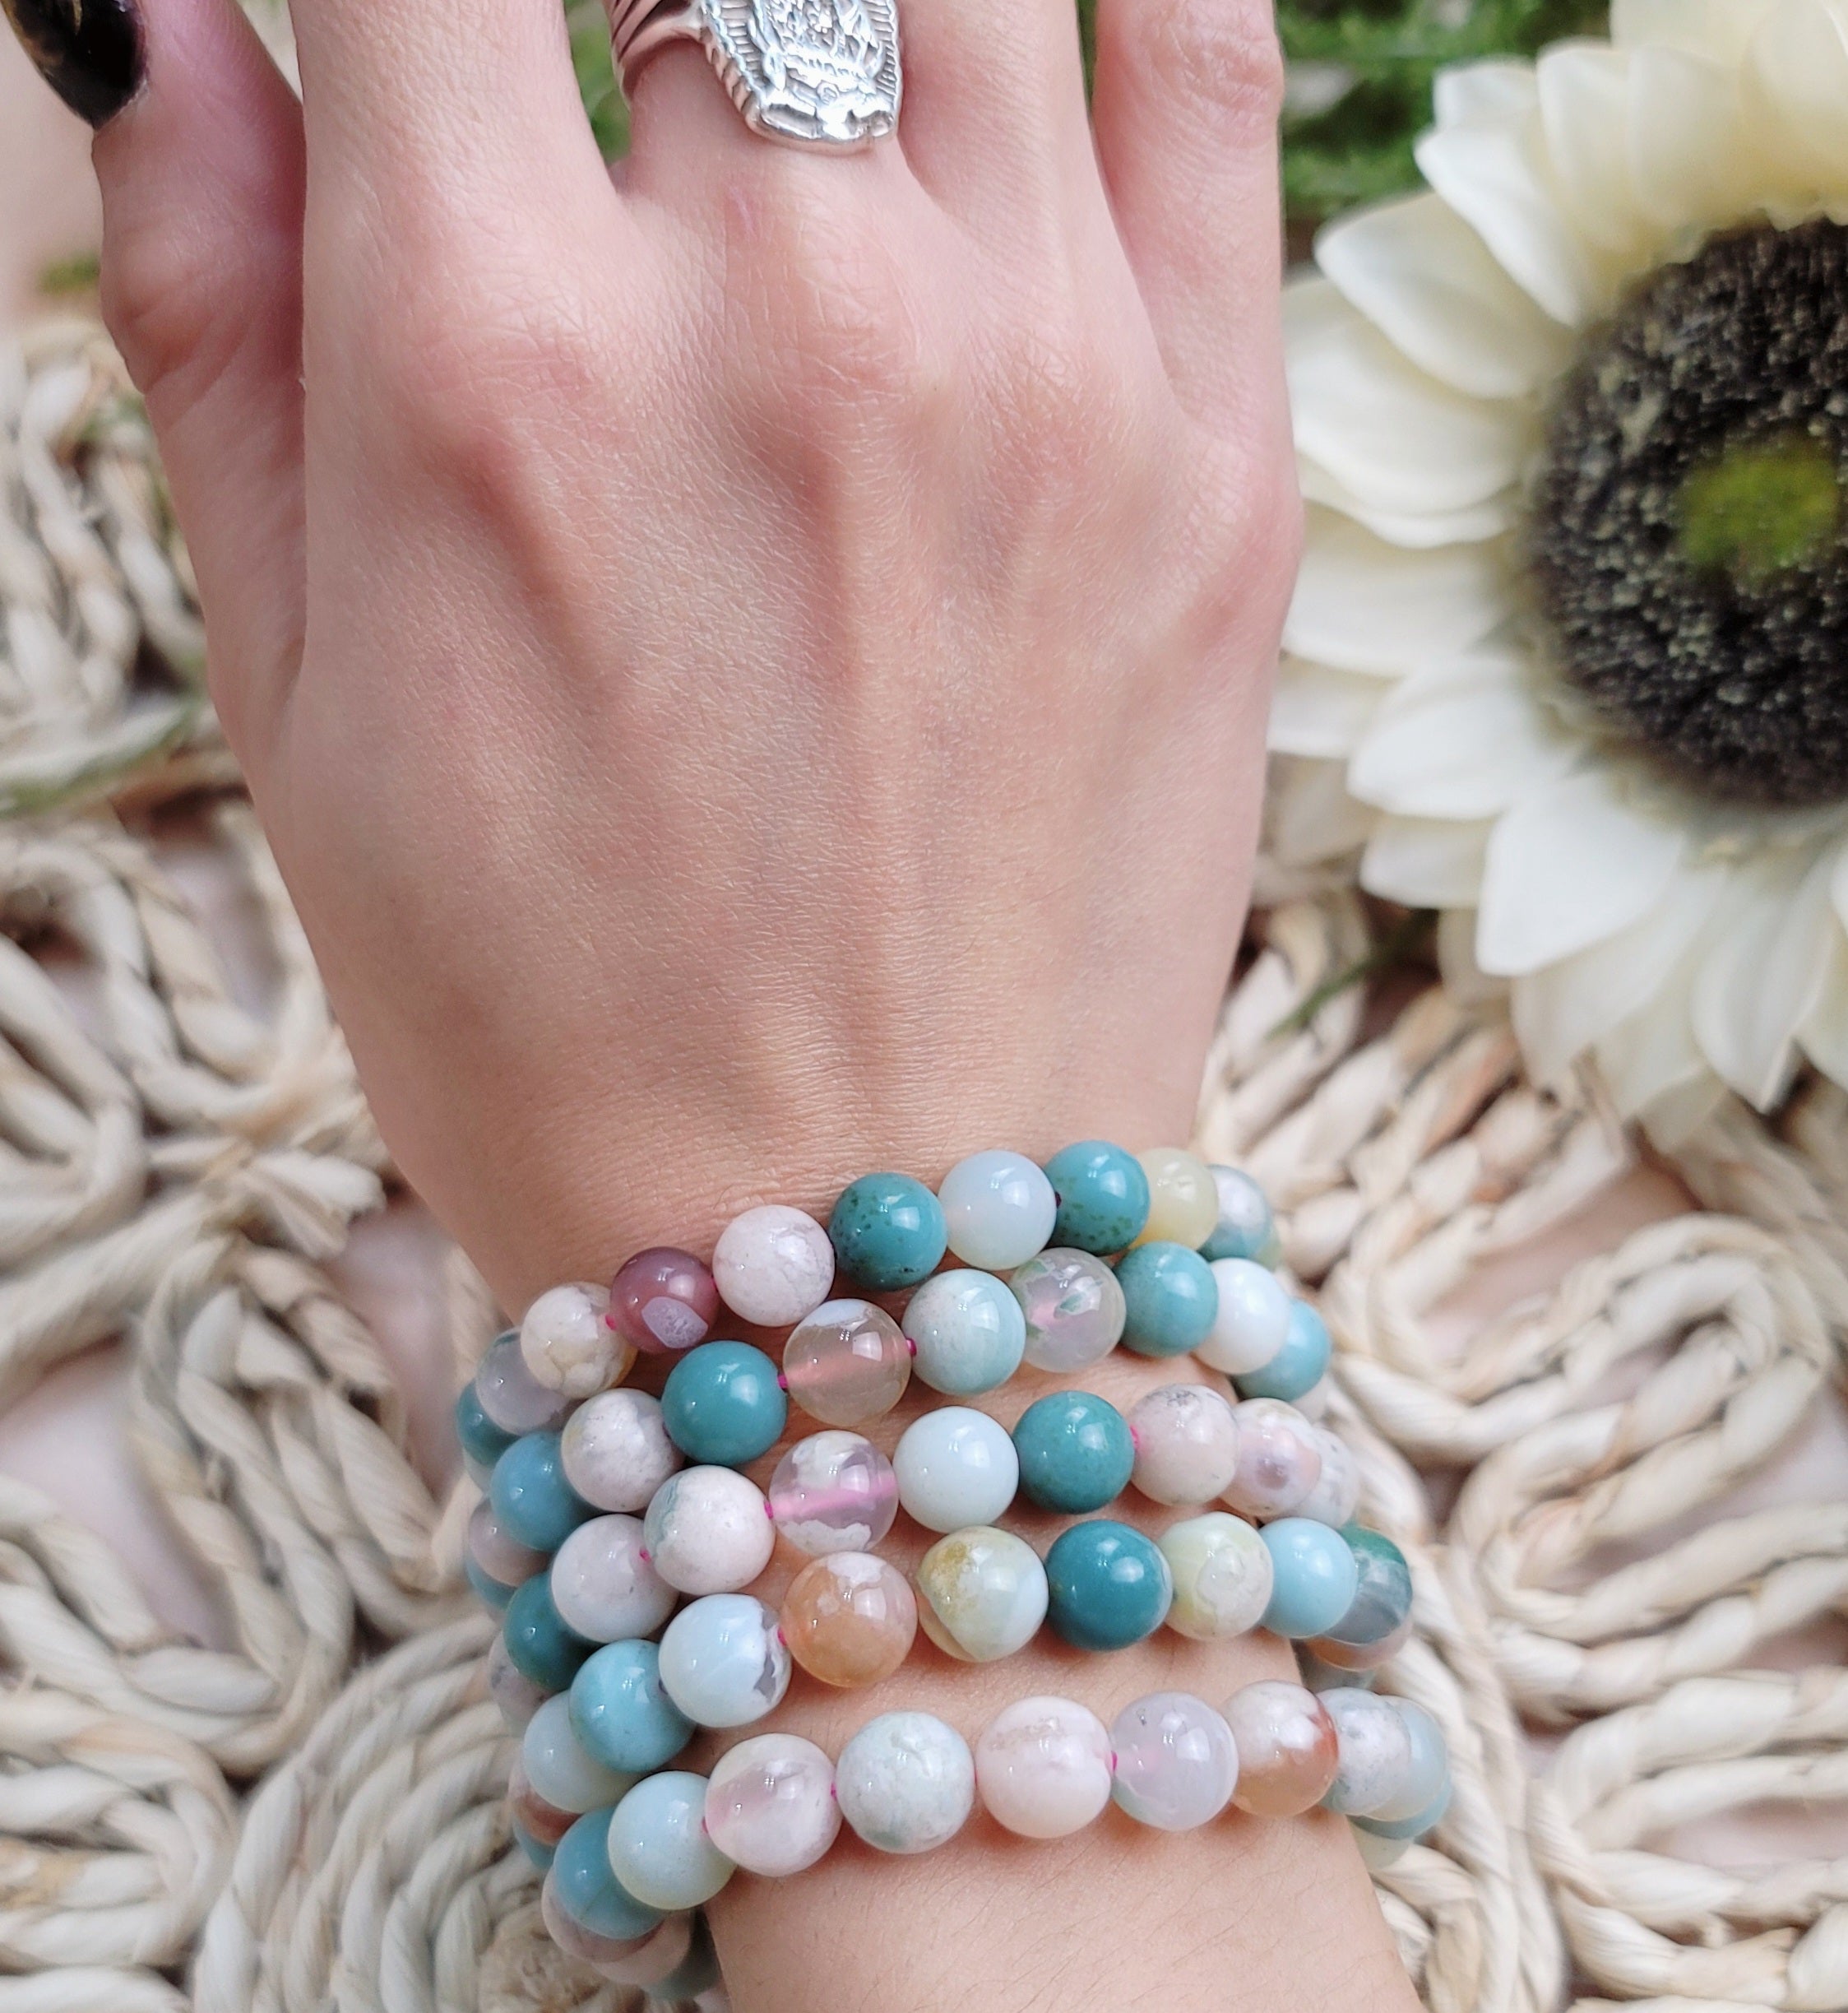 Flower Agate with Chromium Bracelet for Blossoming into your Full Potential